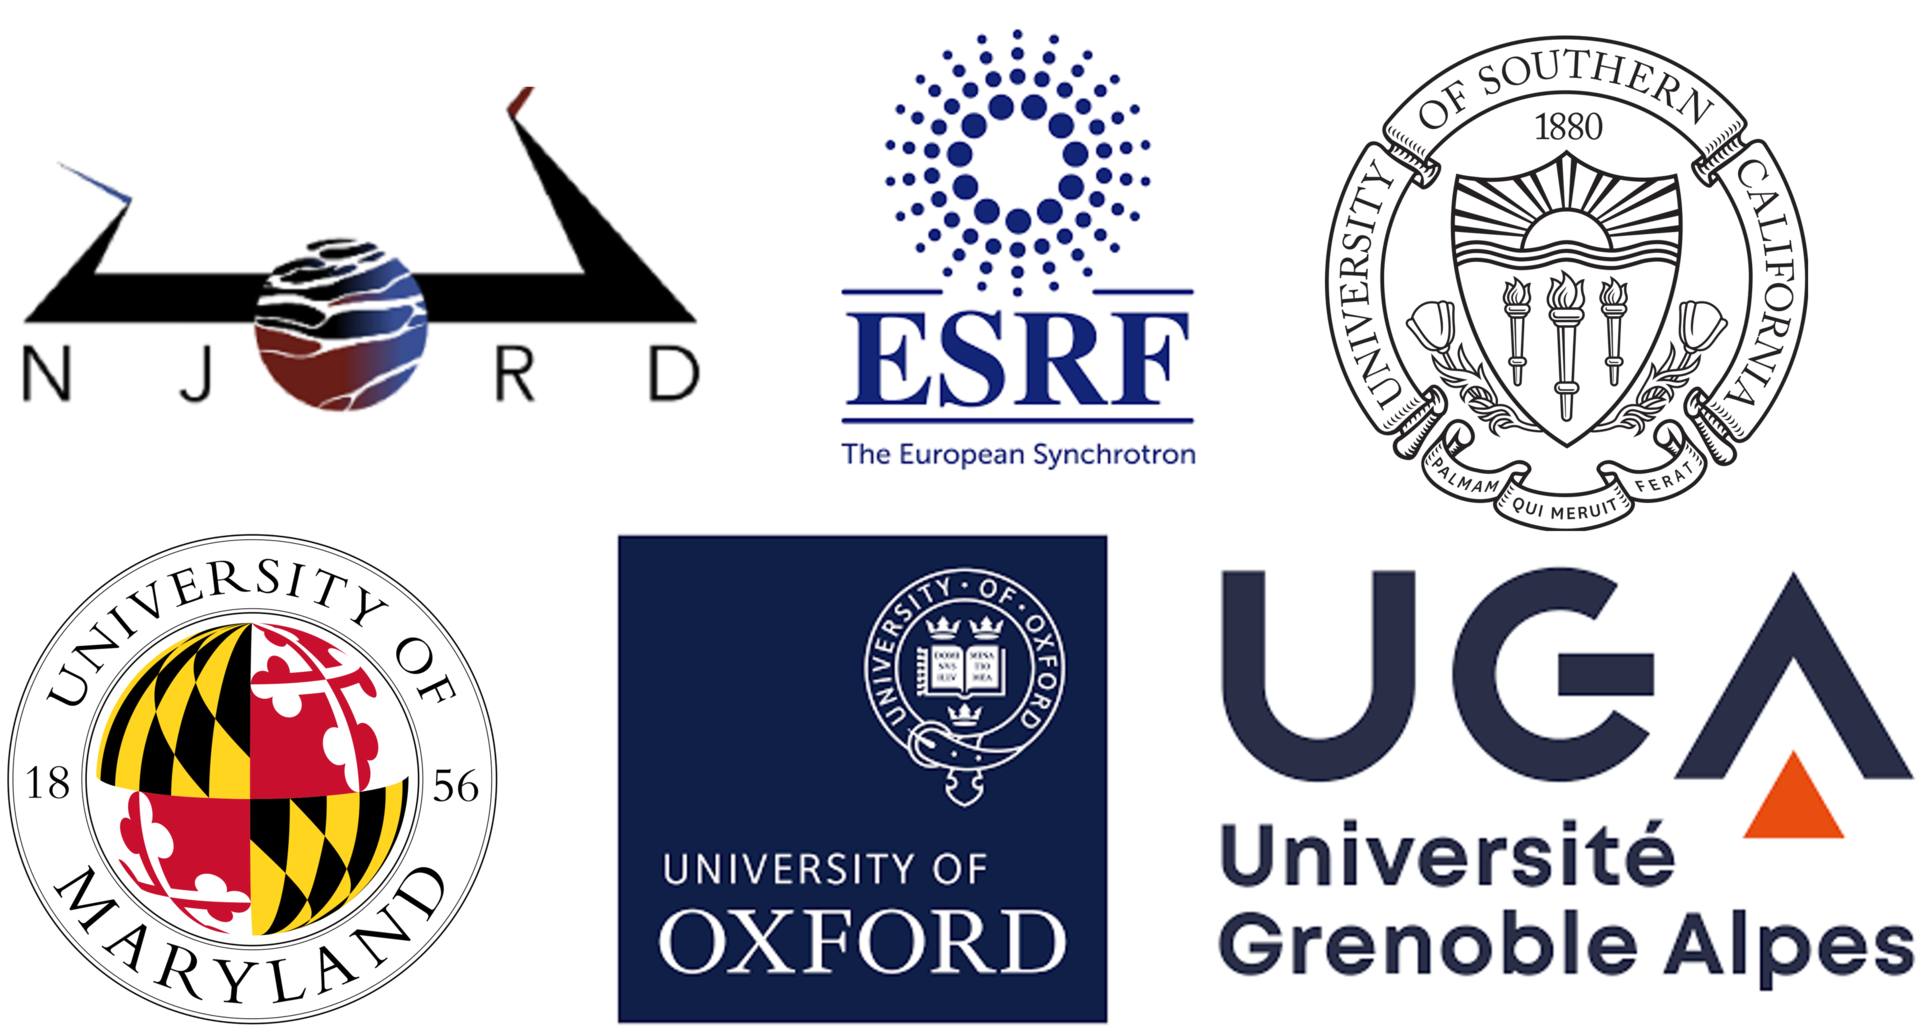 Top row. From the left: the Njord Center's logo, the European Synchotron Radiation Facility logo, and the University of Southern California logo. Bottom row. From the left shows the University of Maryland logo, the Oxford University logo, and the University of Grenoble Alpes logo.